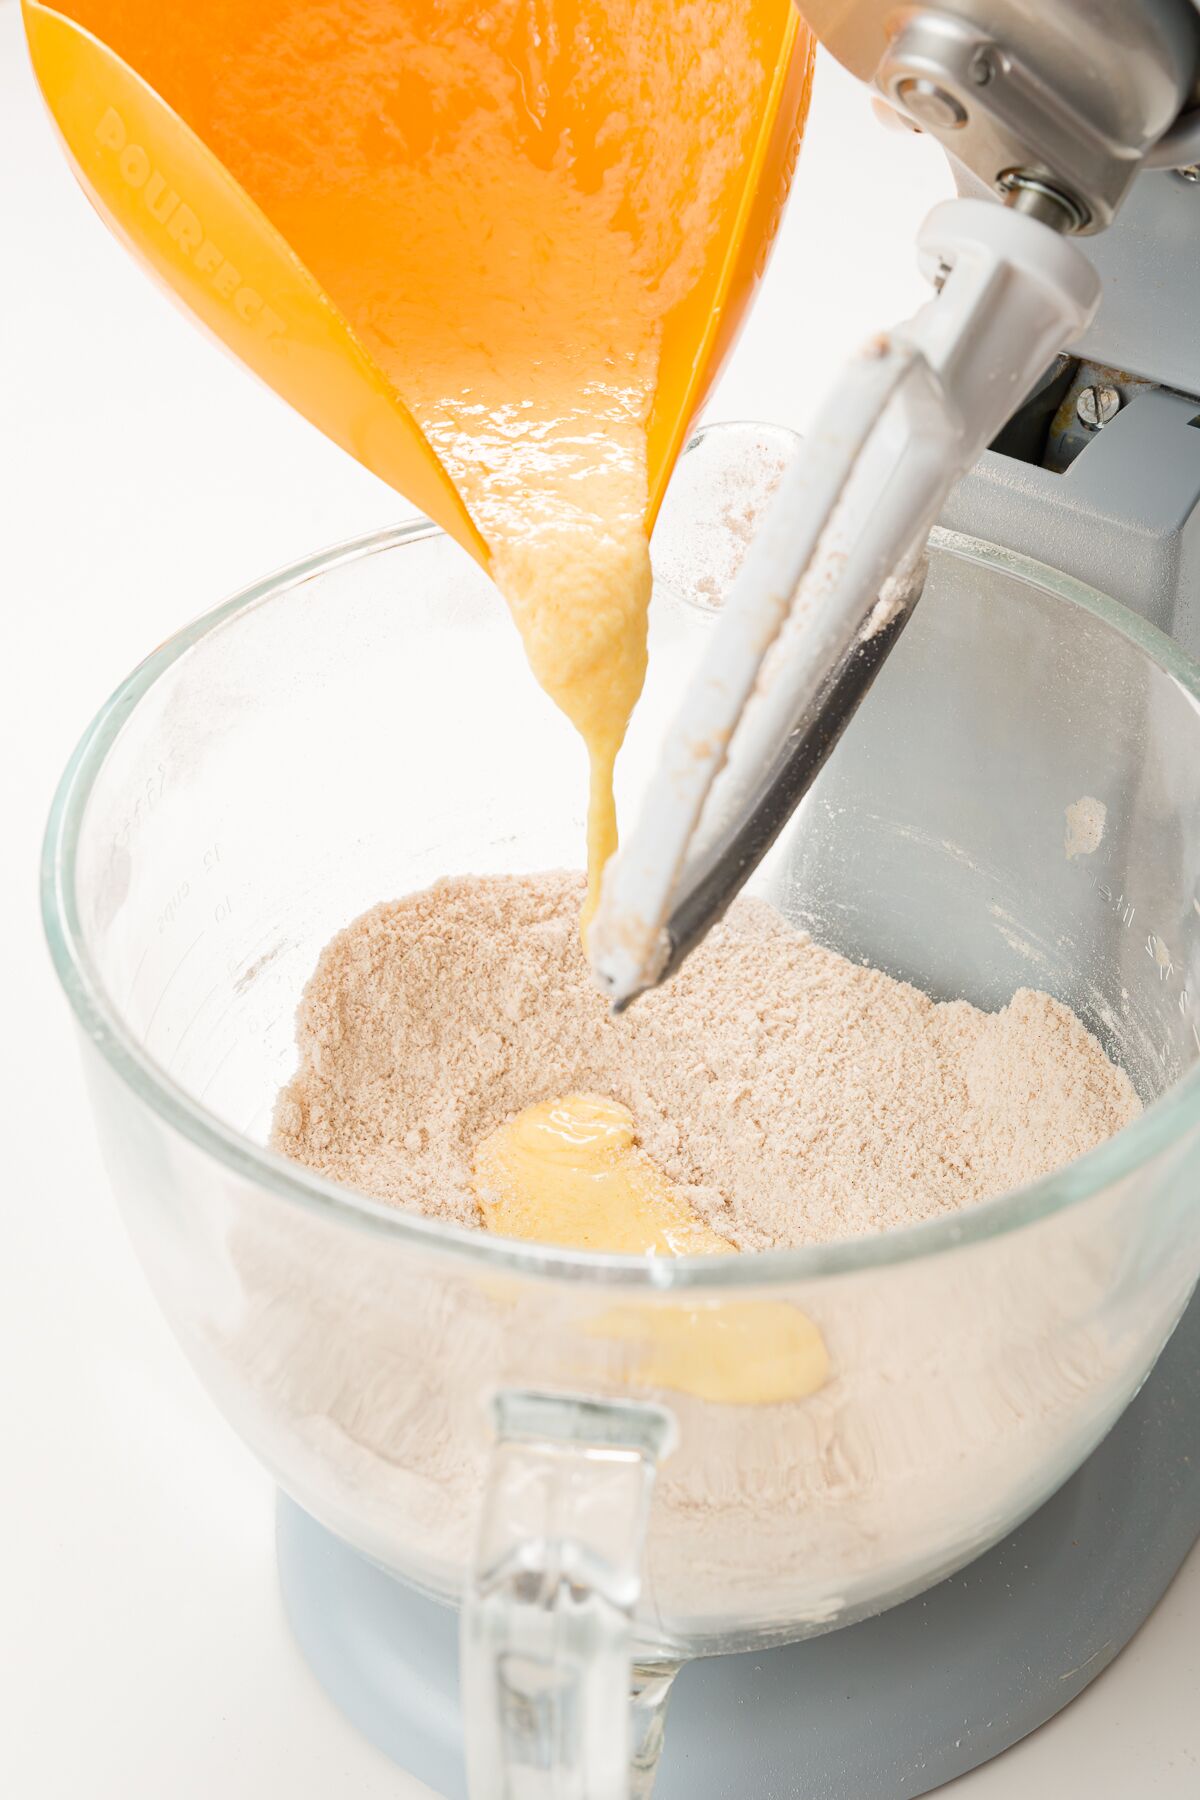 Pouring wet ingredients into stand mixer